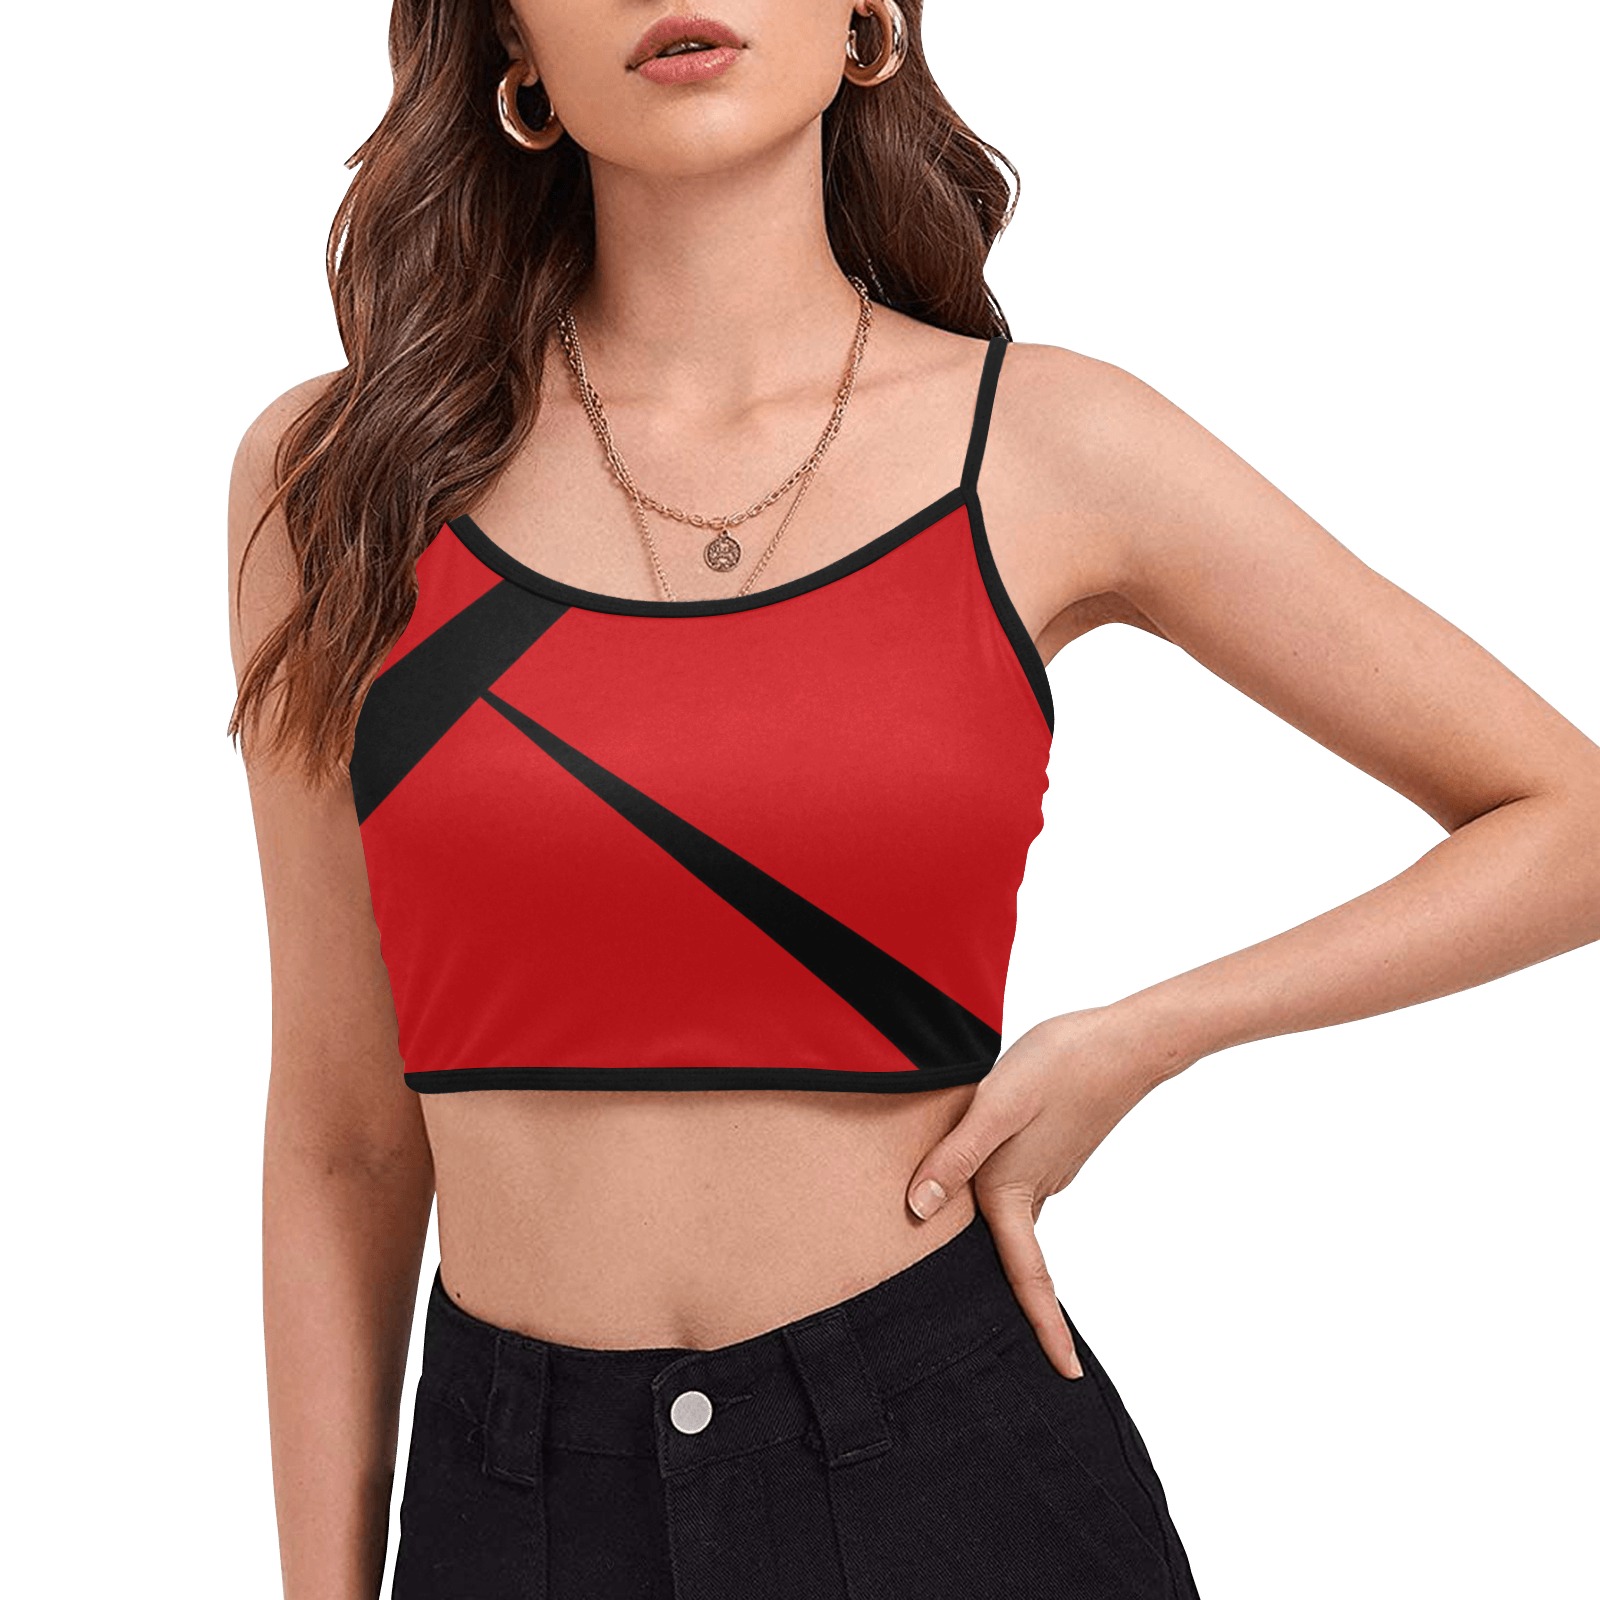 Sexy Red and Black Women's Spaghetti Strap Crop Top (Model T67)